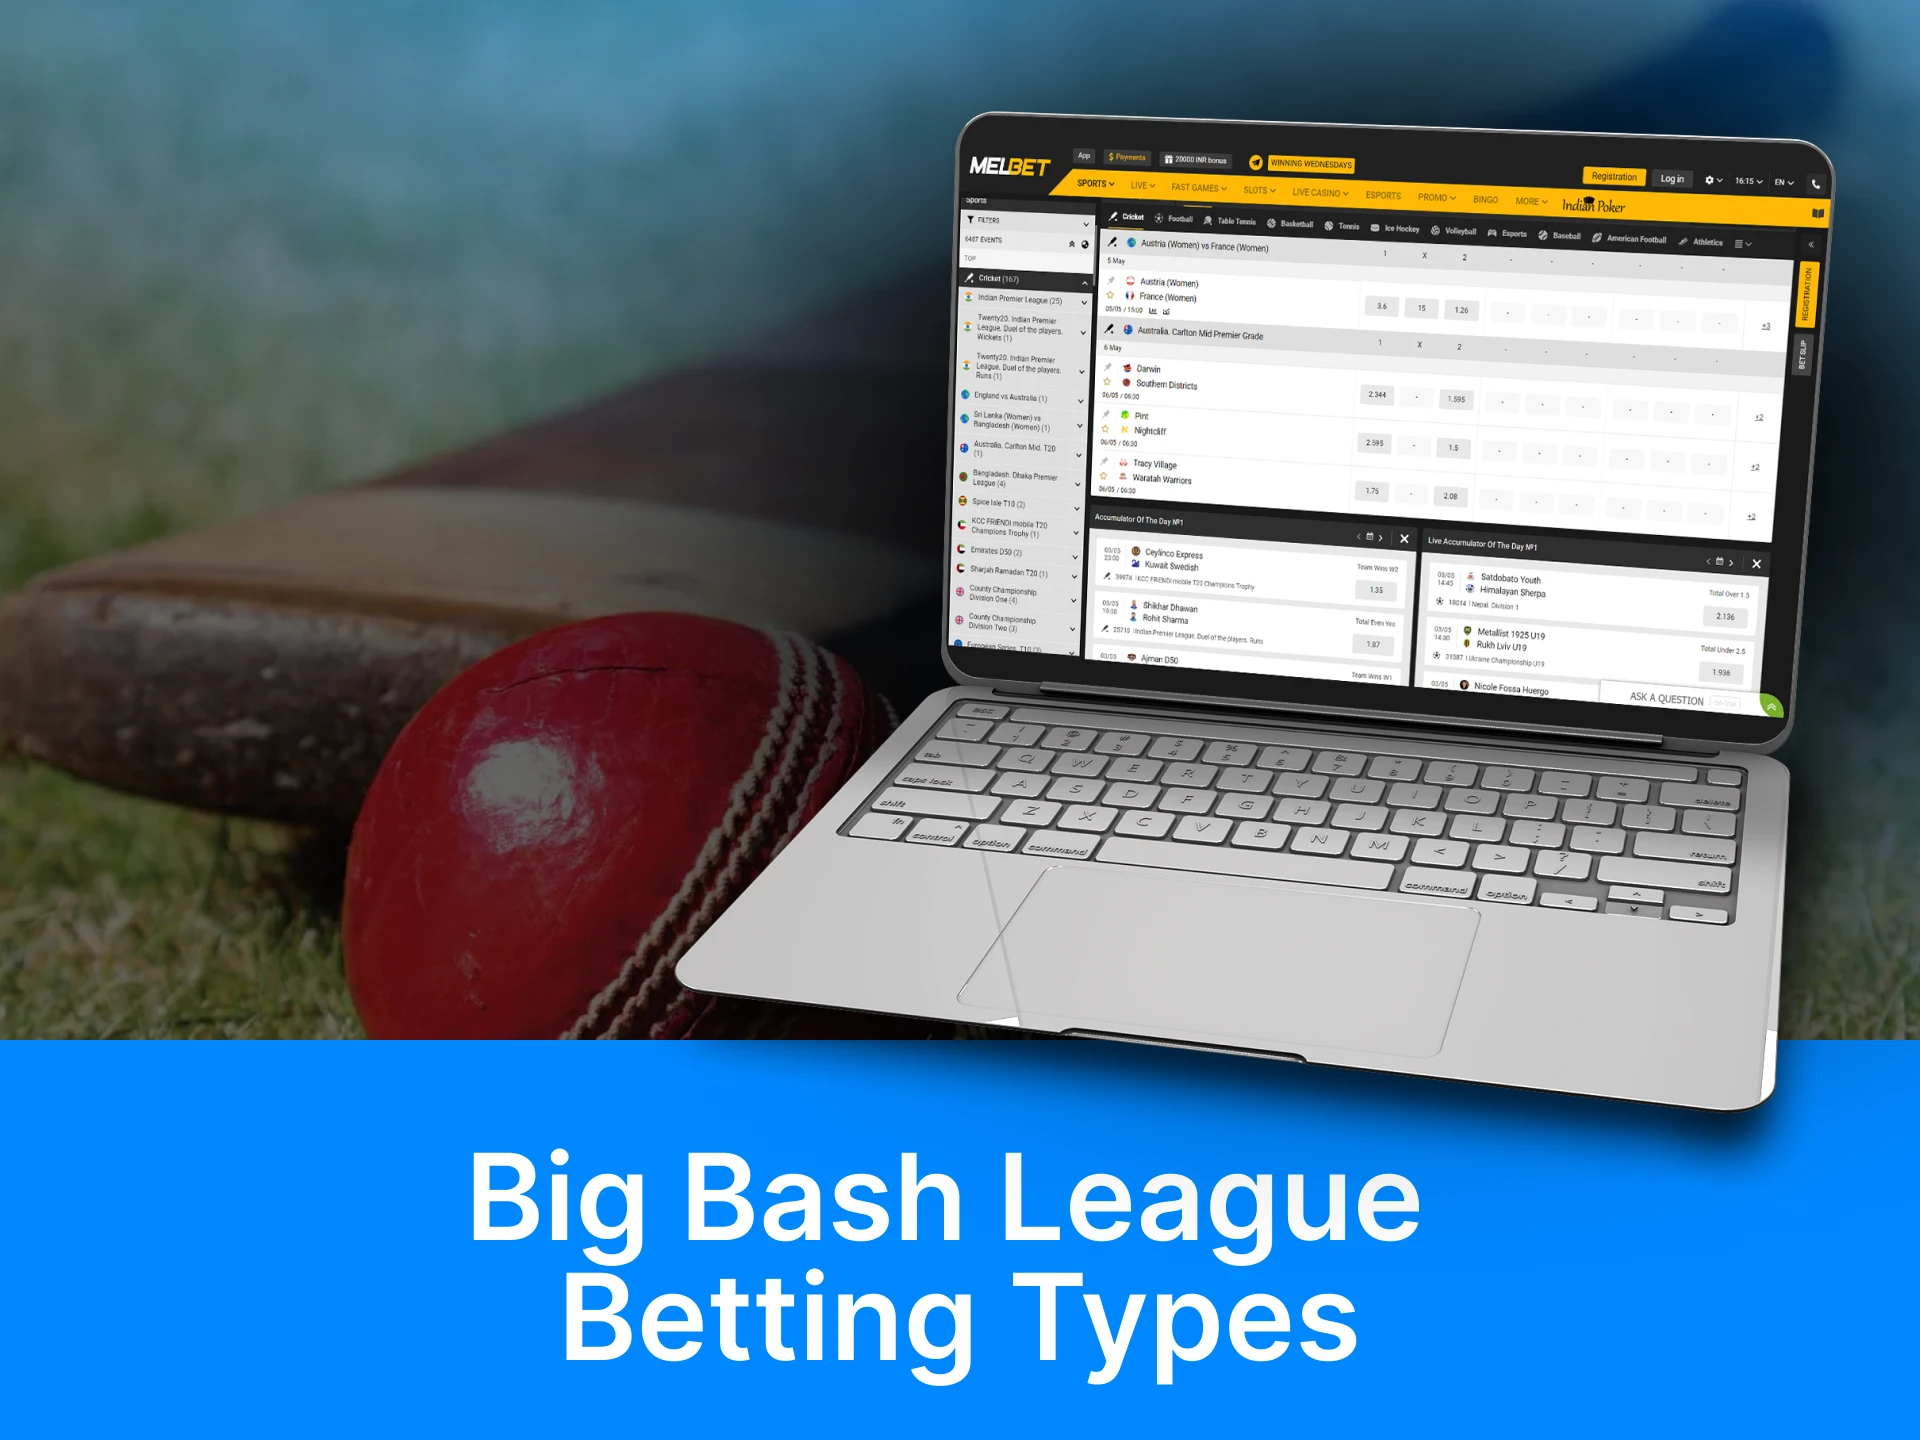 On betting sites, you can form different sets of bets for betting on the BBL events.